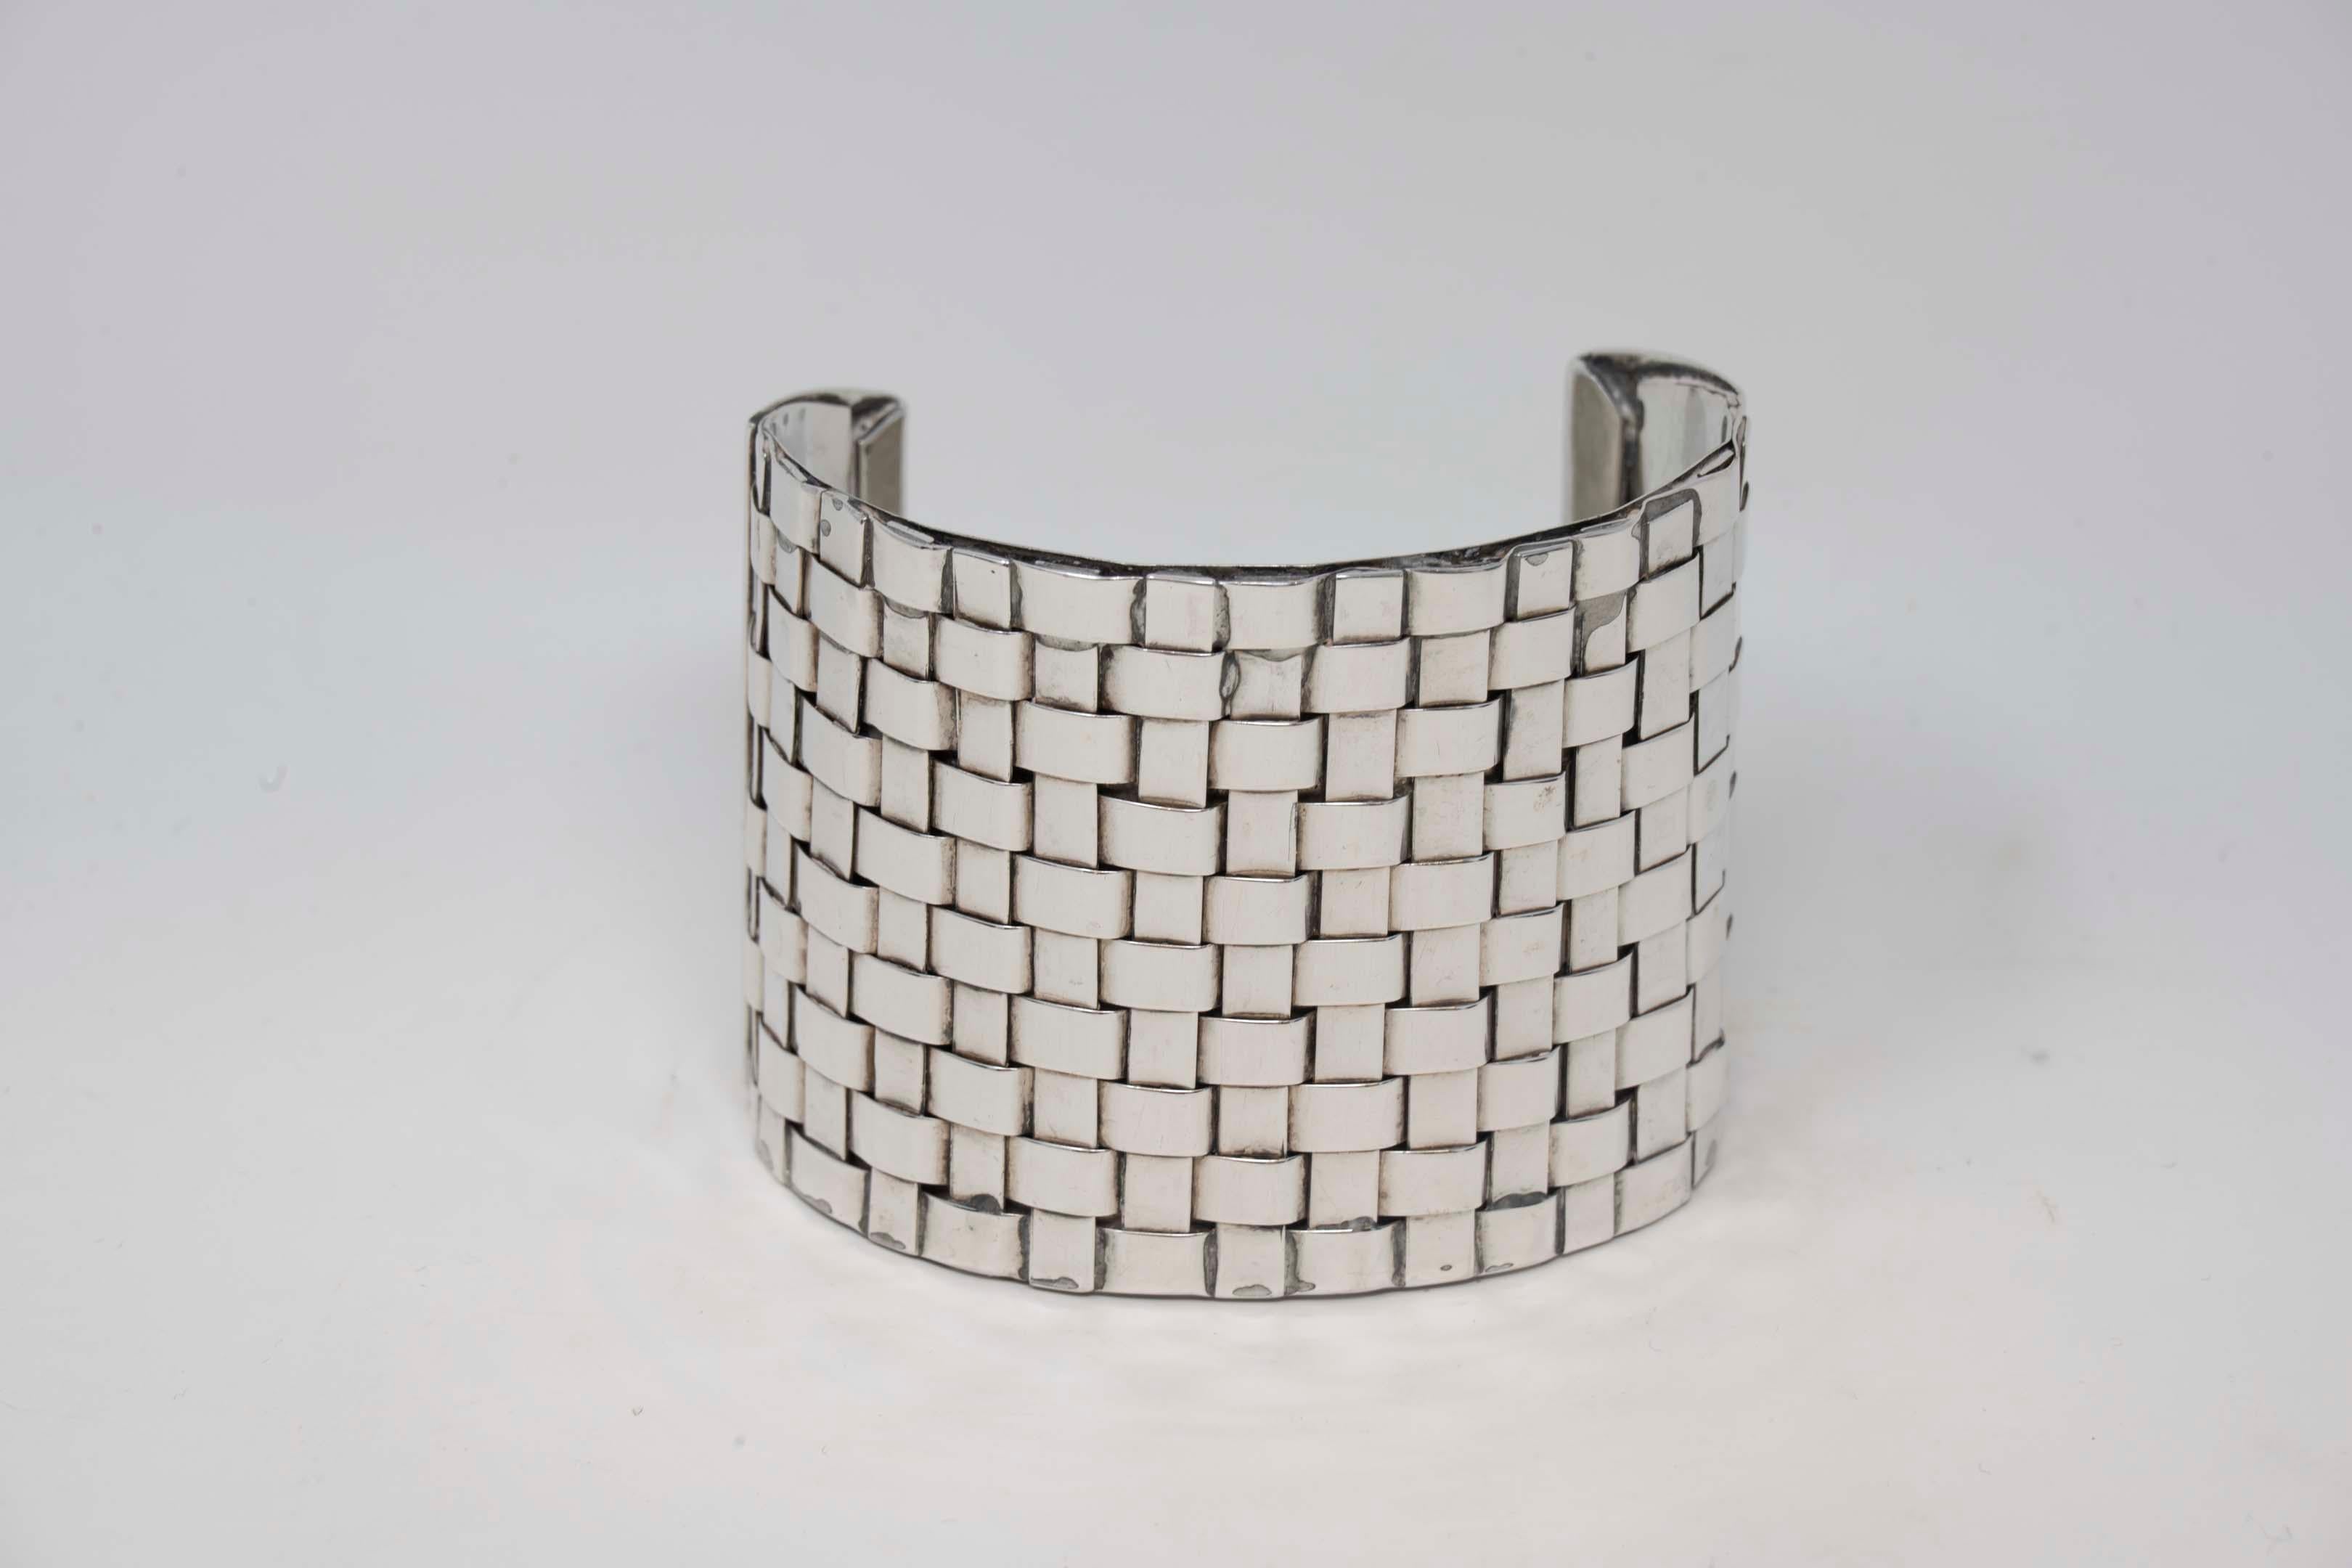 Celia Sebiri sterling silver cuff bracelet signed Sebiri Sterling, prominent New York designer active from 1970-1990. Bracelet measures 2 1/2 inches x 2 inches, preowned. Weighs 86.6 grams, in good condition.
